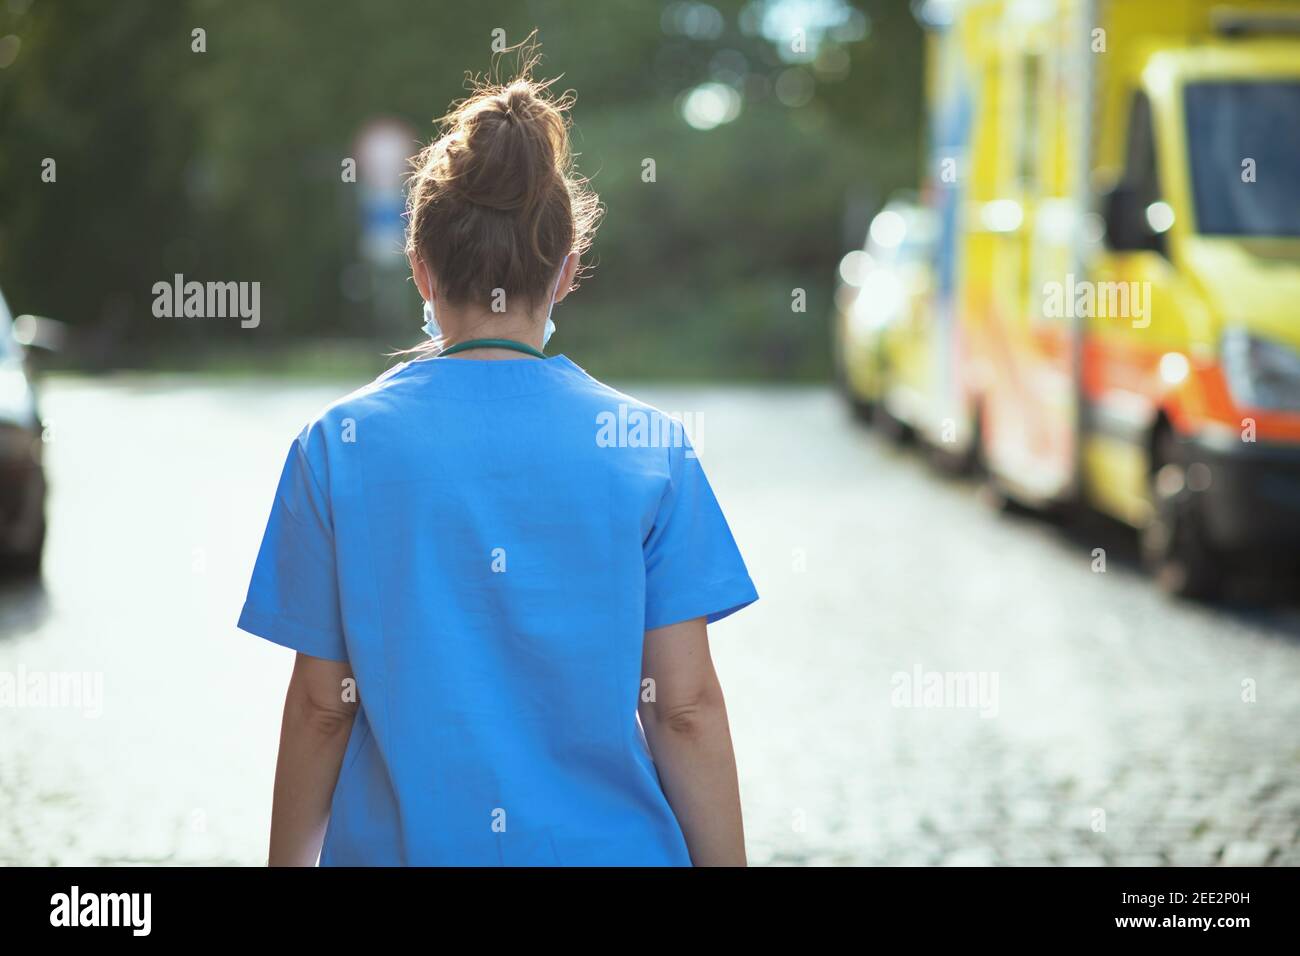 covid-19 pandemic. Seen from behind medical doctor woman in scrubs outside near ambulance walking. Stock Photo